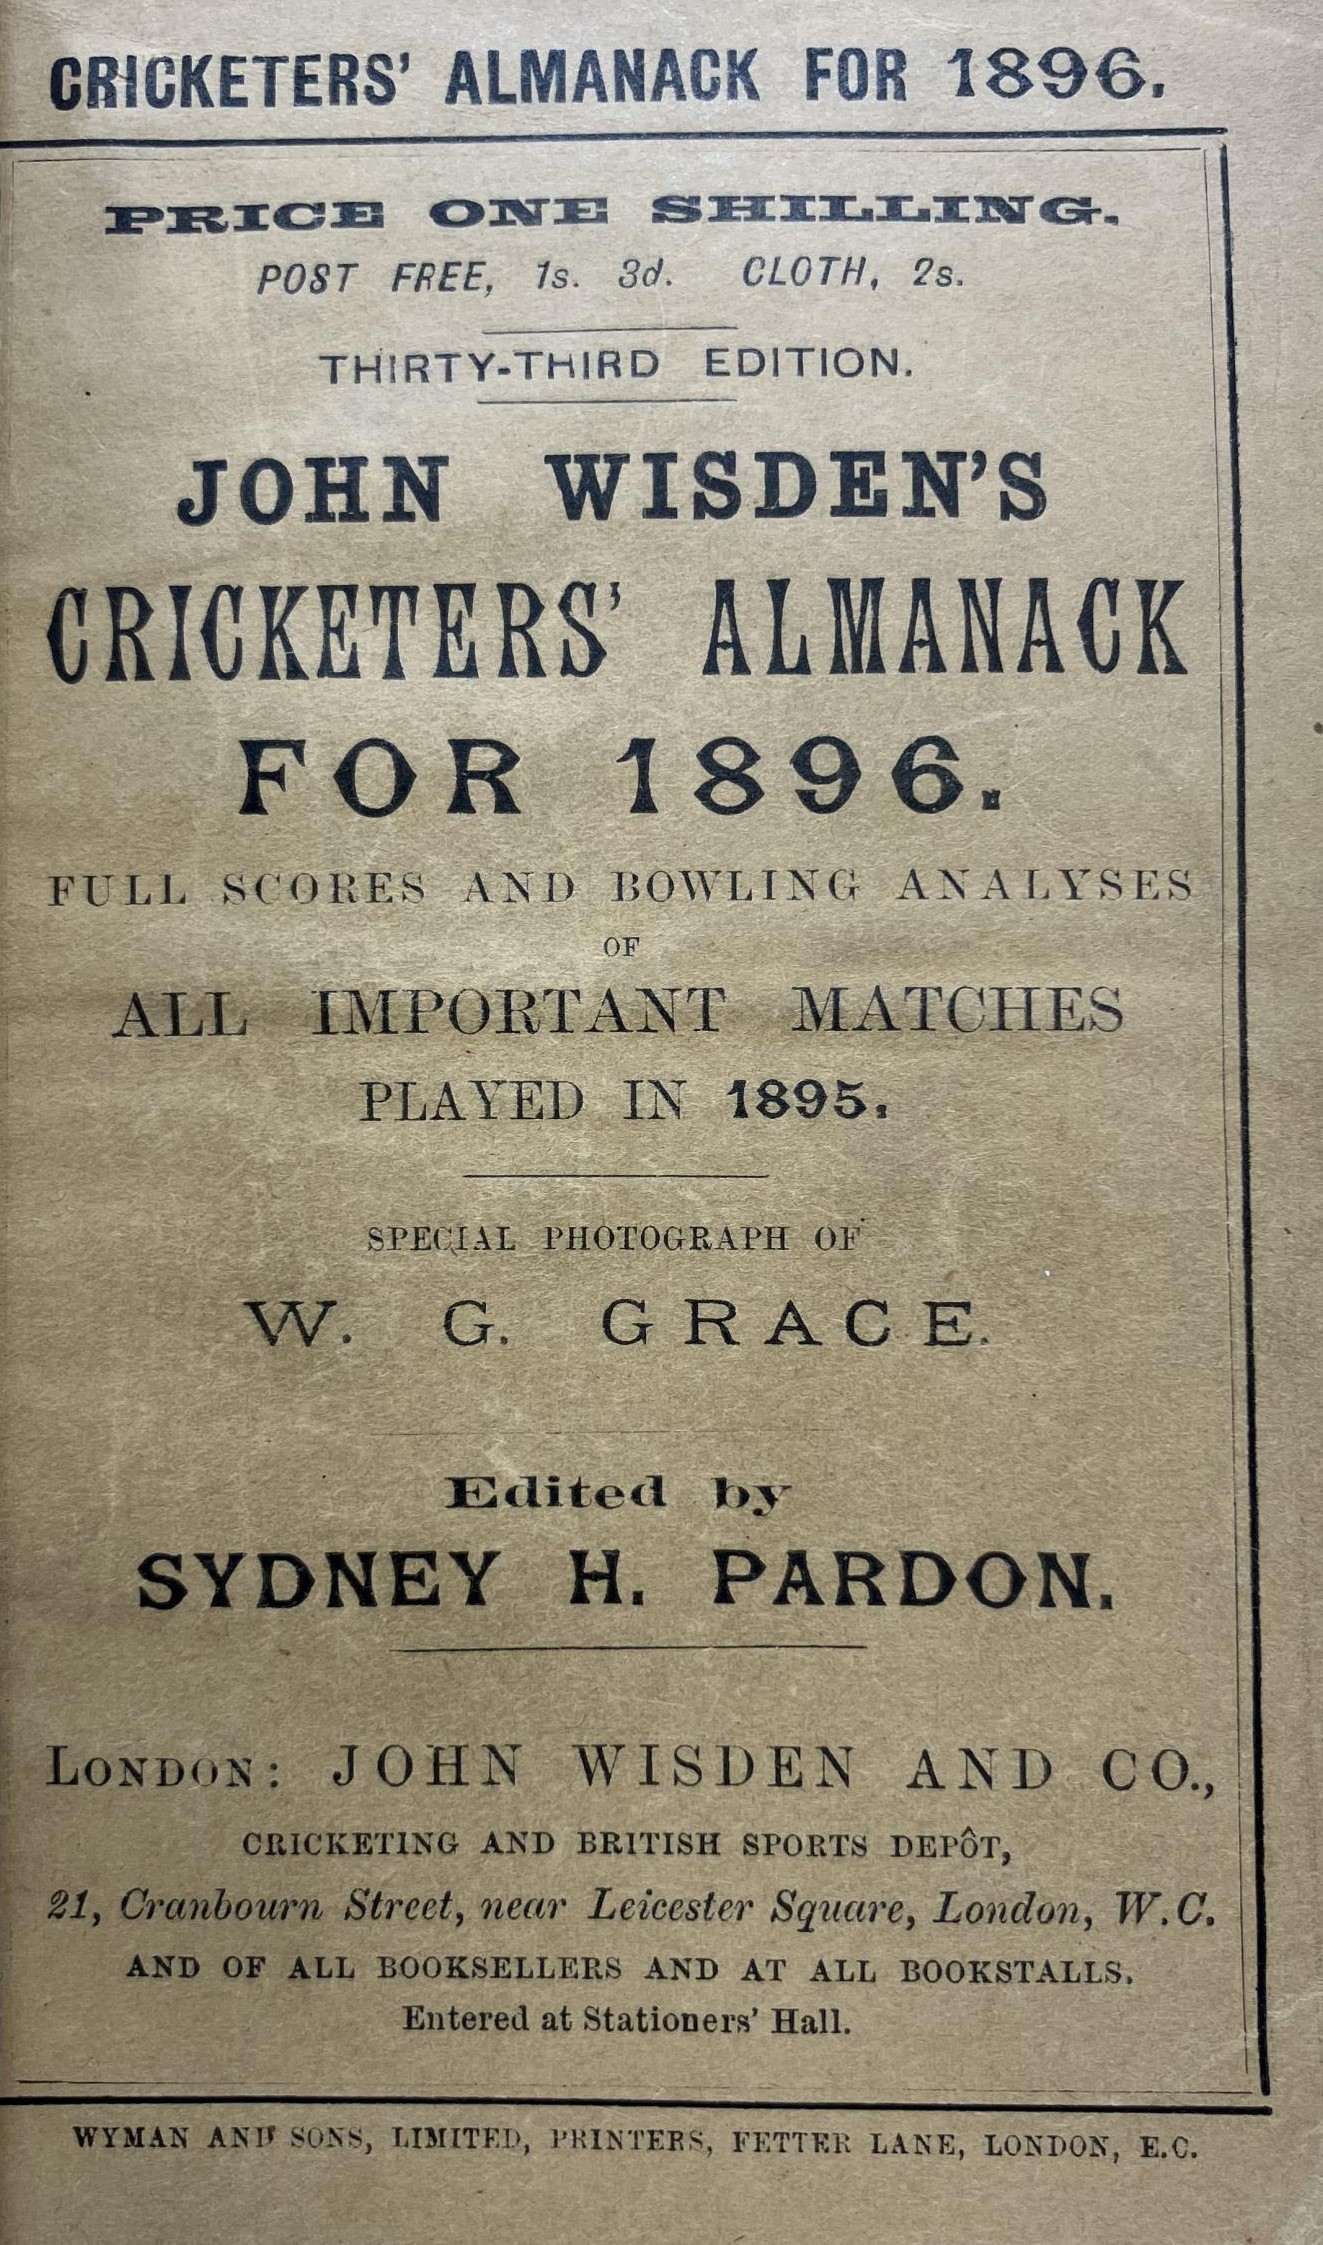 A Wisden Cricketers' Almanack, 1896 Provenance:  From the Harry Brewer Cricket Memorabilia - Image 3 of 4